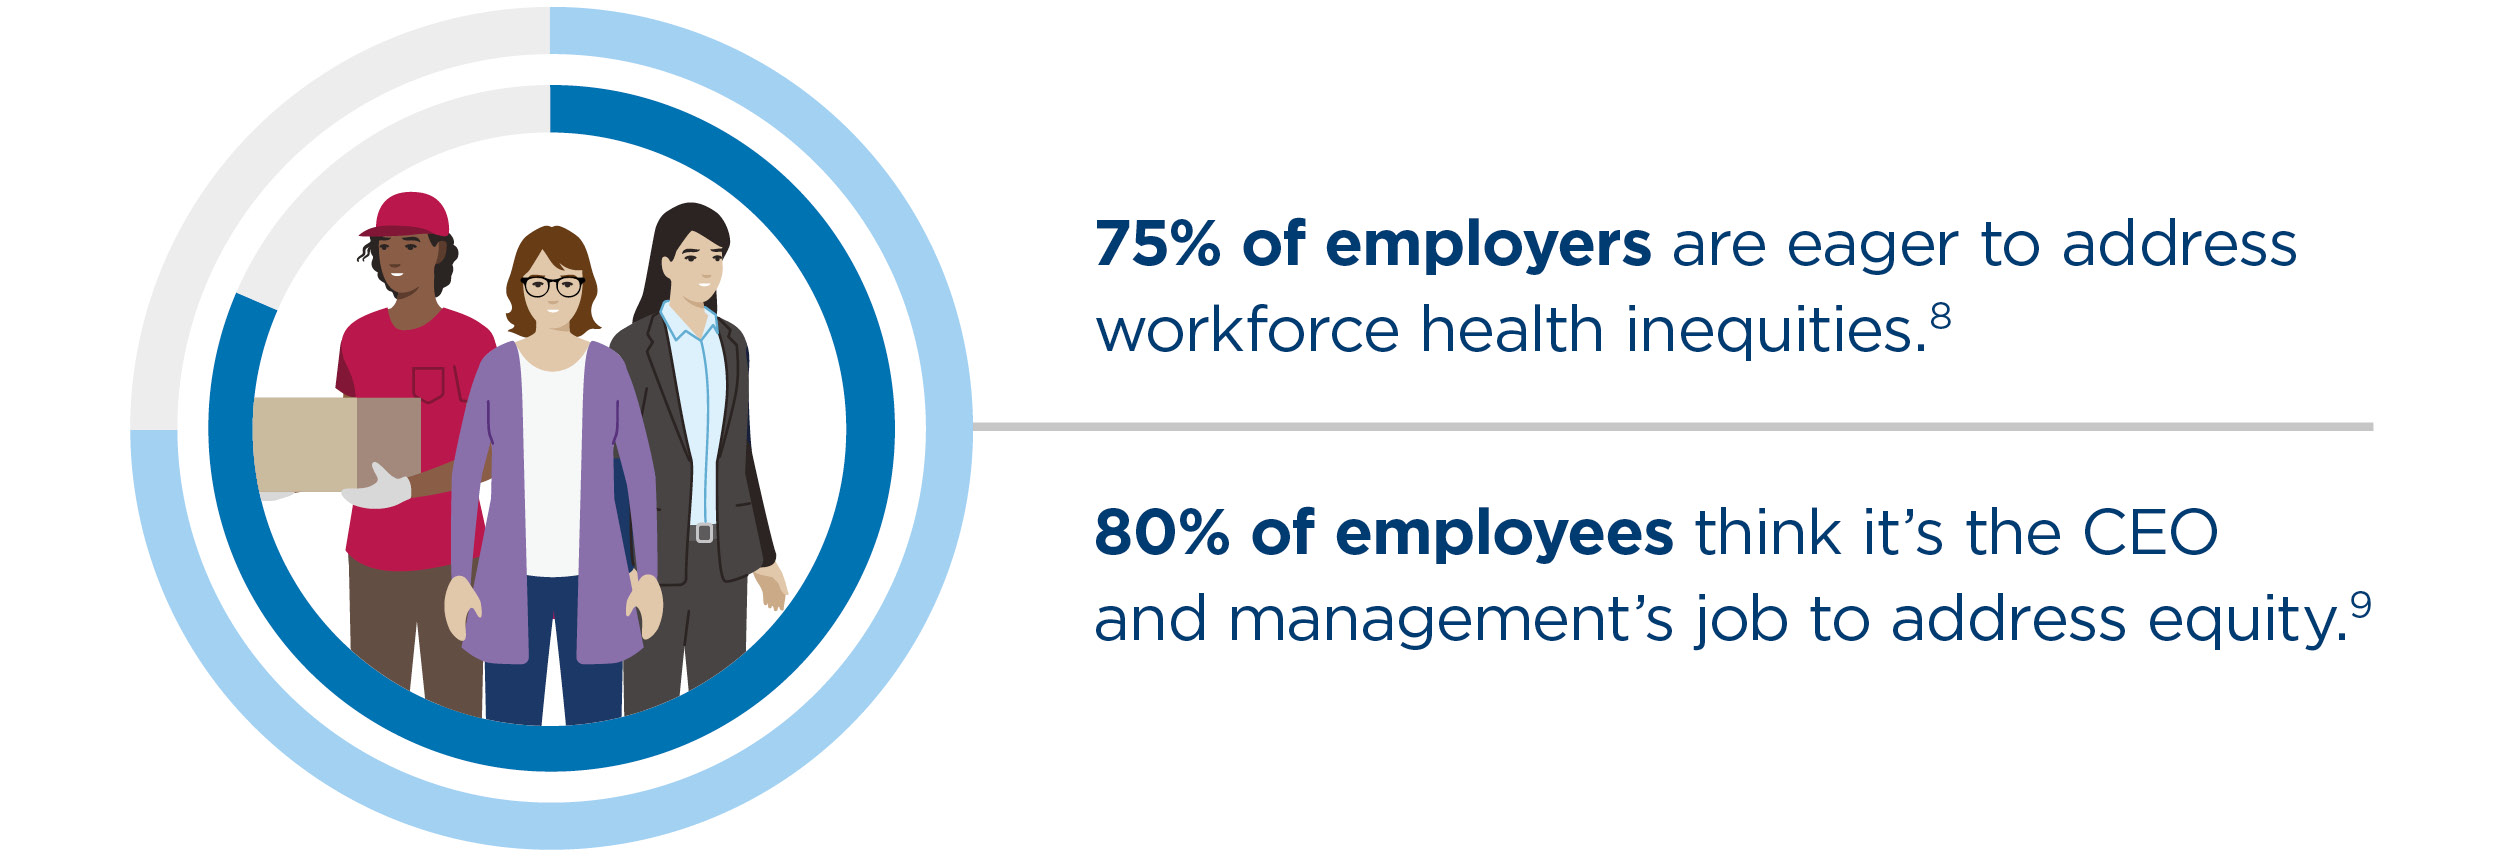 75% of employers are eager to address workforce health inequities. 80% of employees think it’s the CEO and management’s job to address equity.